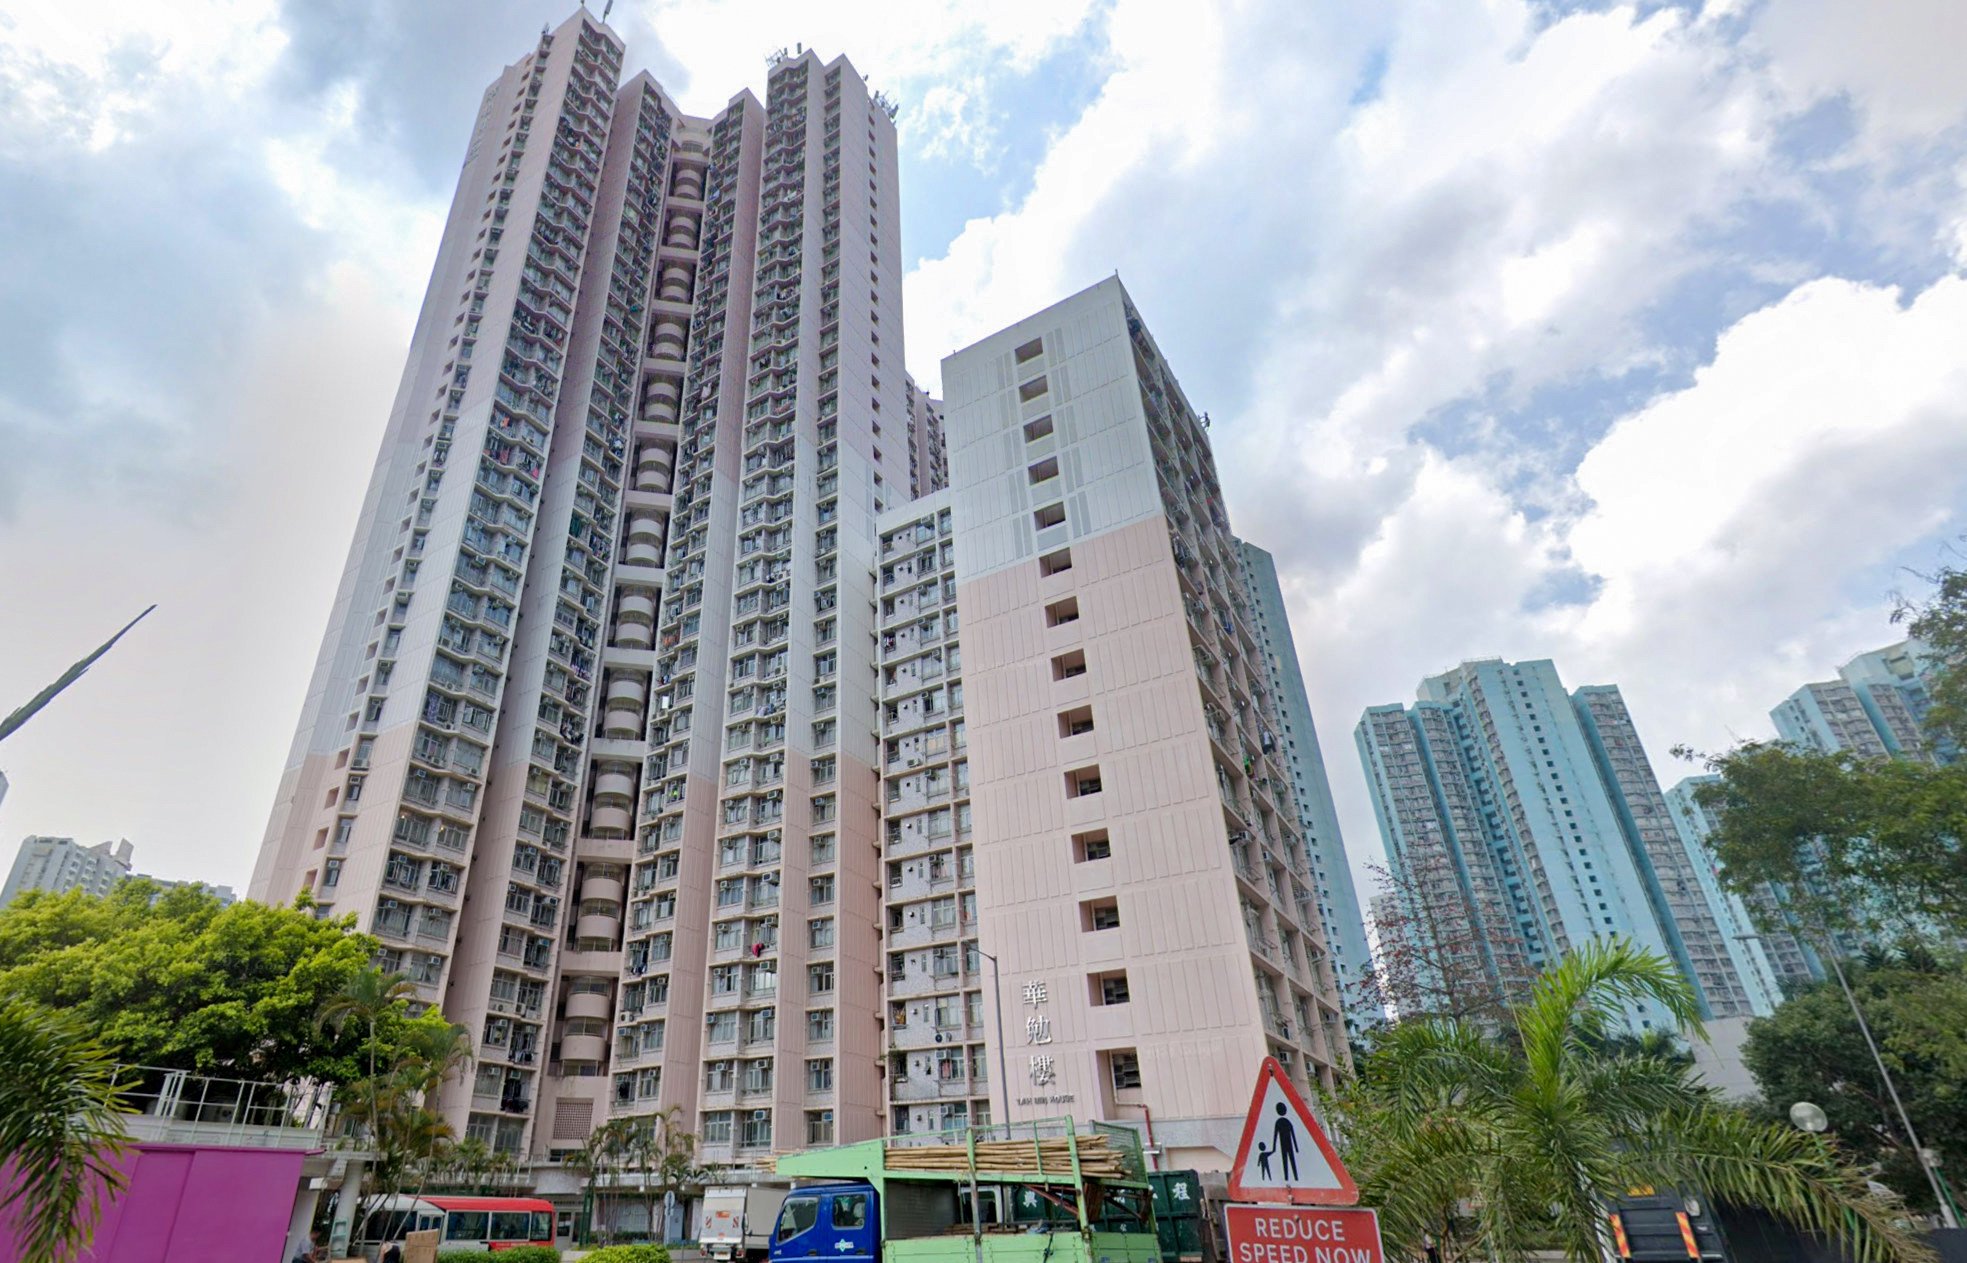 A dispute turned violent at a lower-floor flat at Wah Min House, Wah Sum Estate, police said. Photo: Google Maps